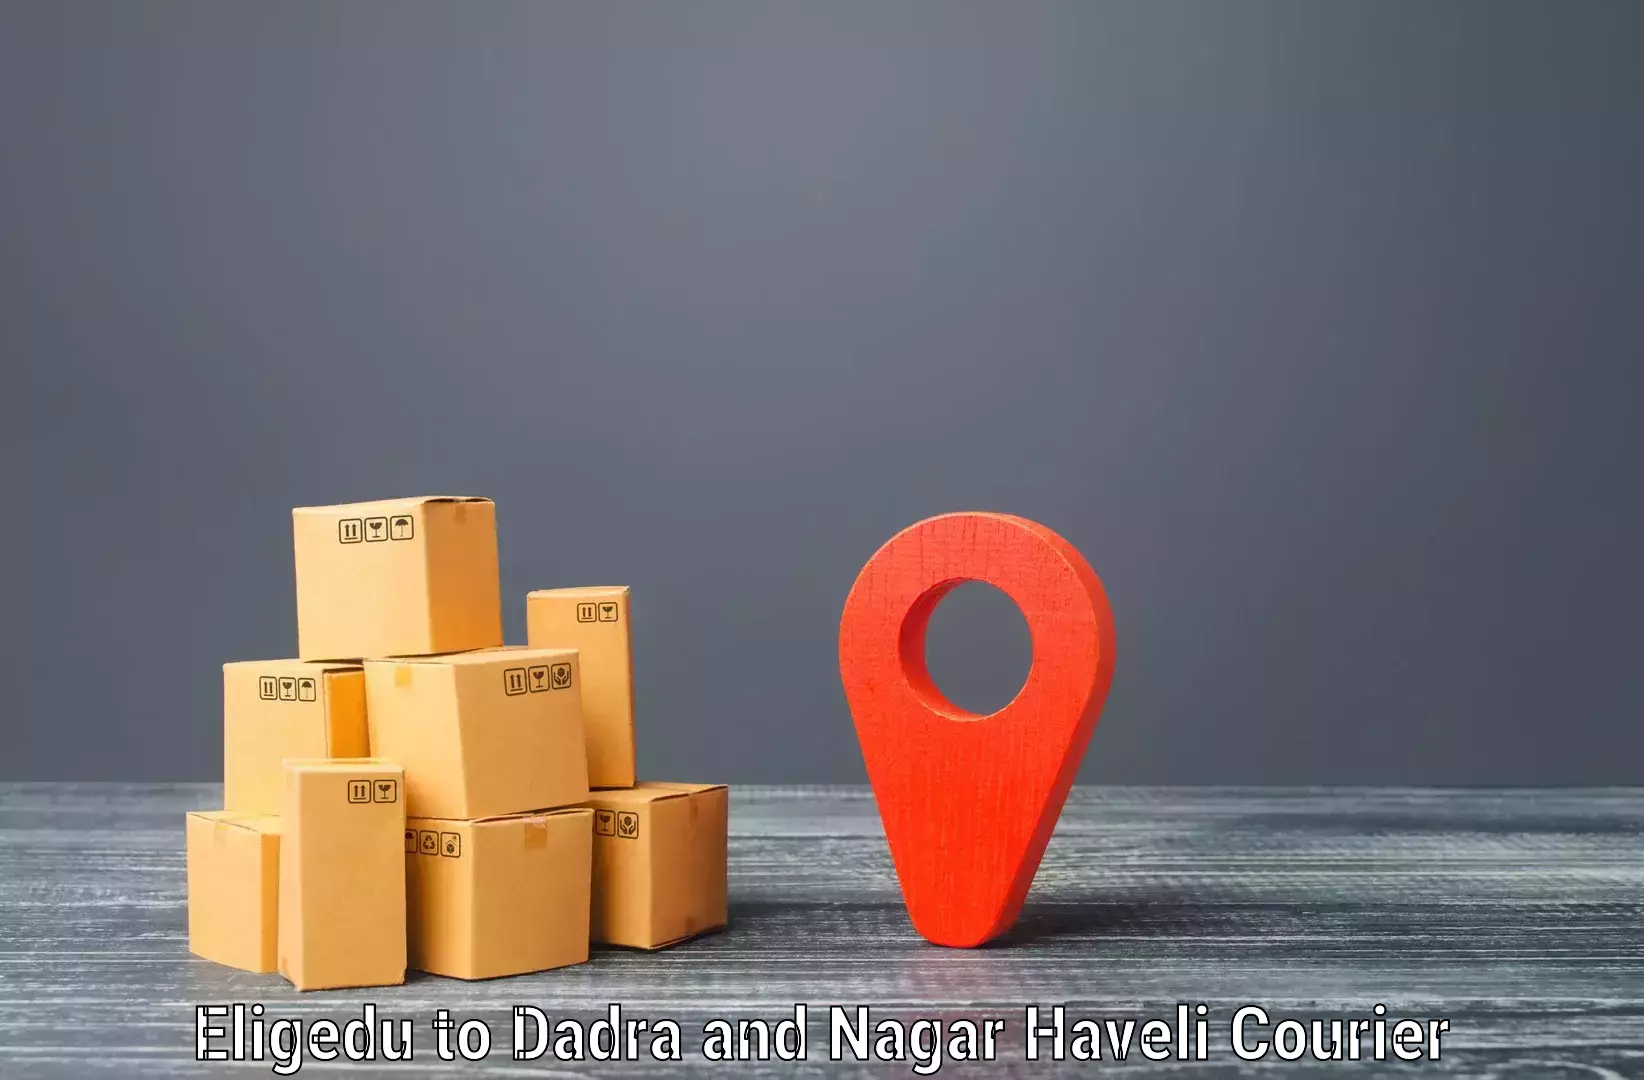 Fast-track shipping solutions Eligedu to Dadra and Nagar Haveli